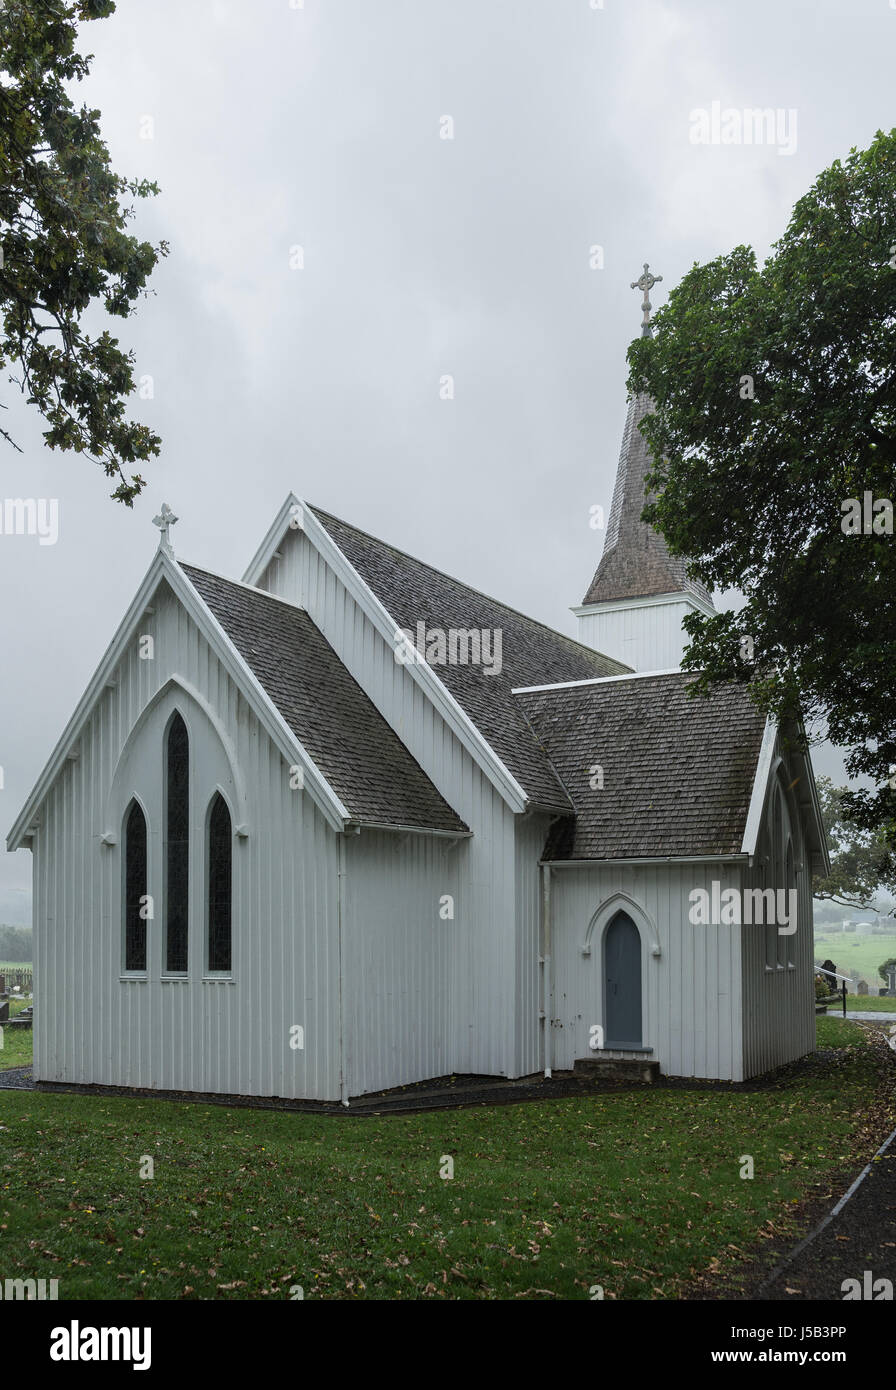 Bay of Islands, New Zealand - March 7, 2017: Historic first settlement mission church called Te Waimate. White church, gray roof, green trees and gras Stock Photo